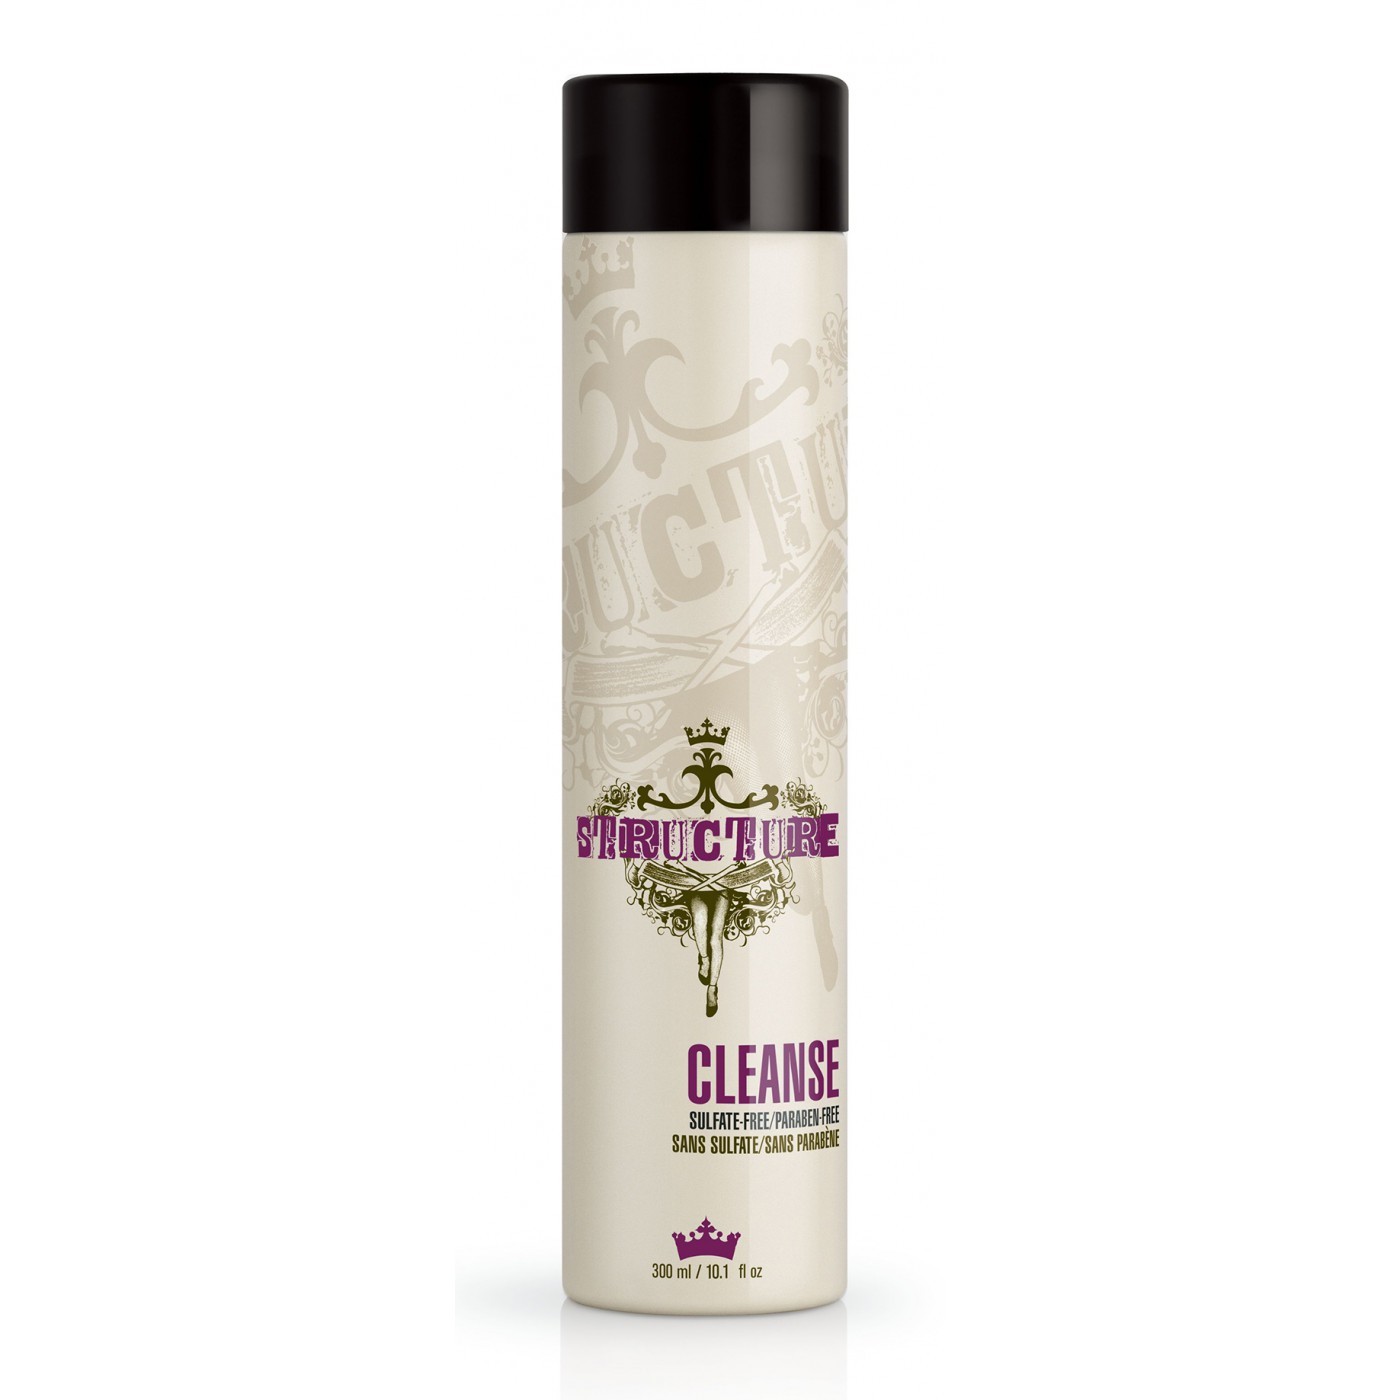 *Structure Cleanse 300ml*